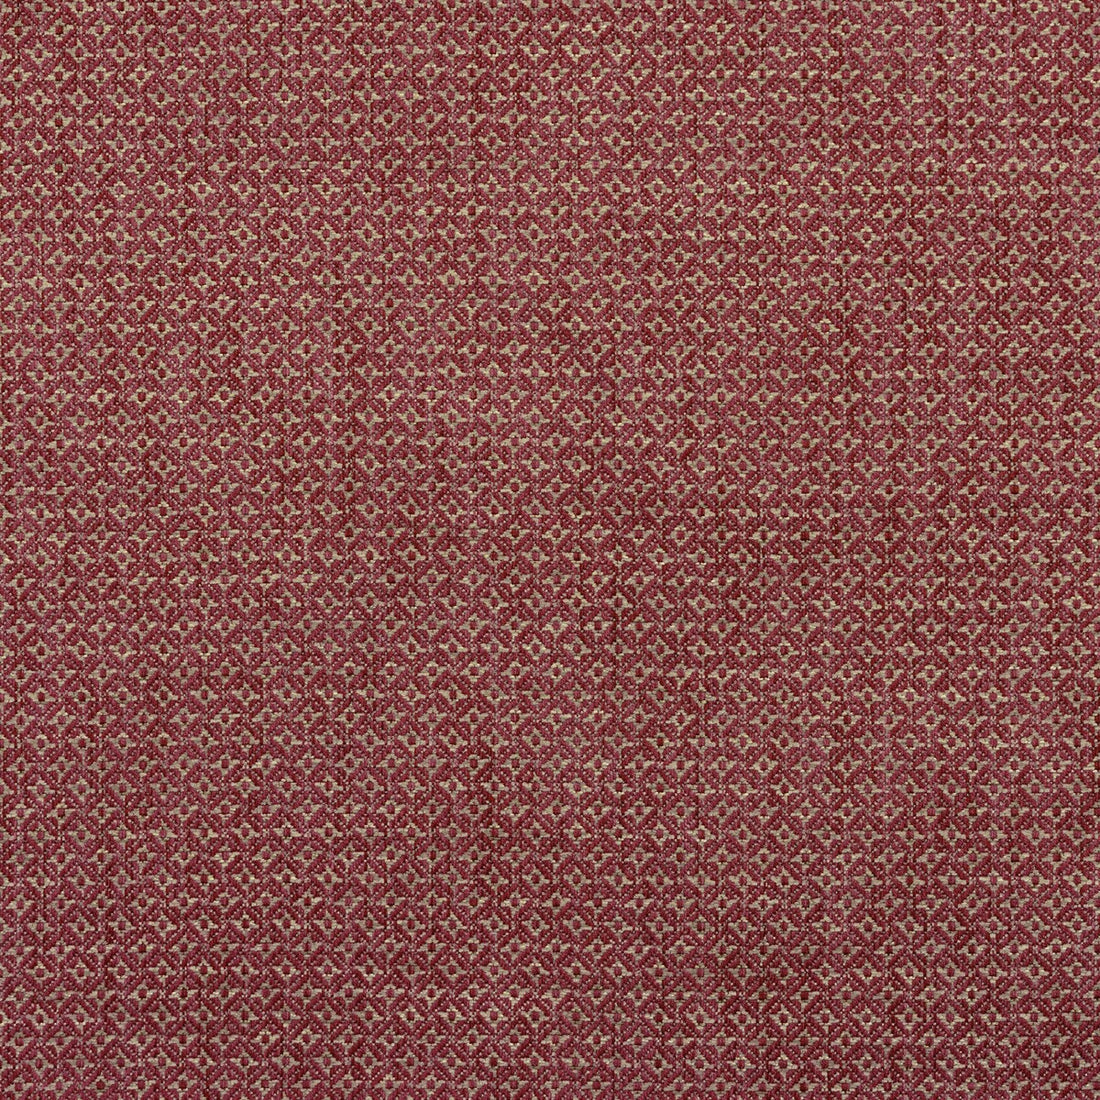 Cavendish fabric in rose color - pattern BFC-3677.717.0 - by Lee Jofa in the Blithfield collection